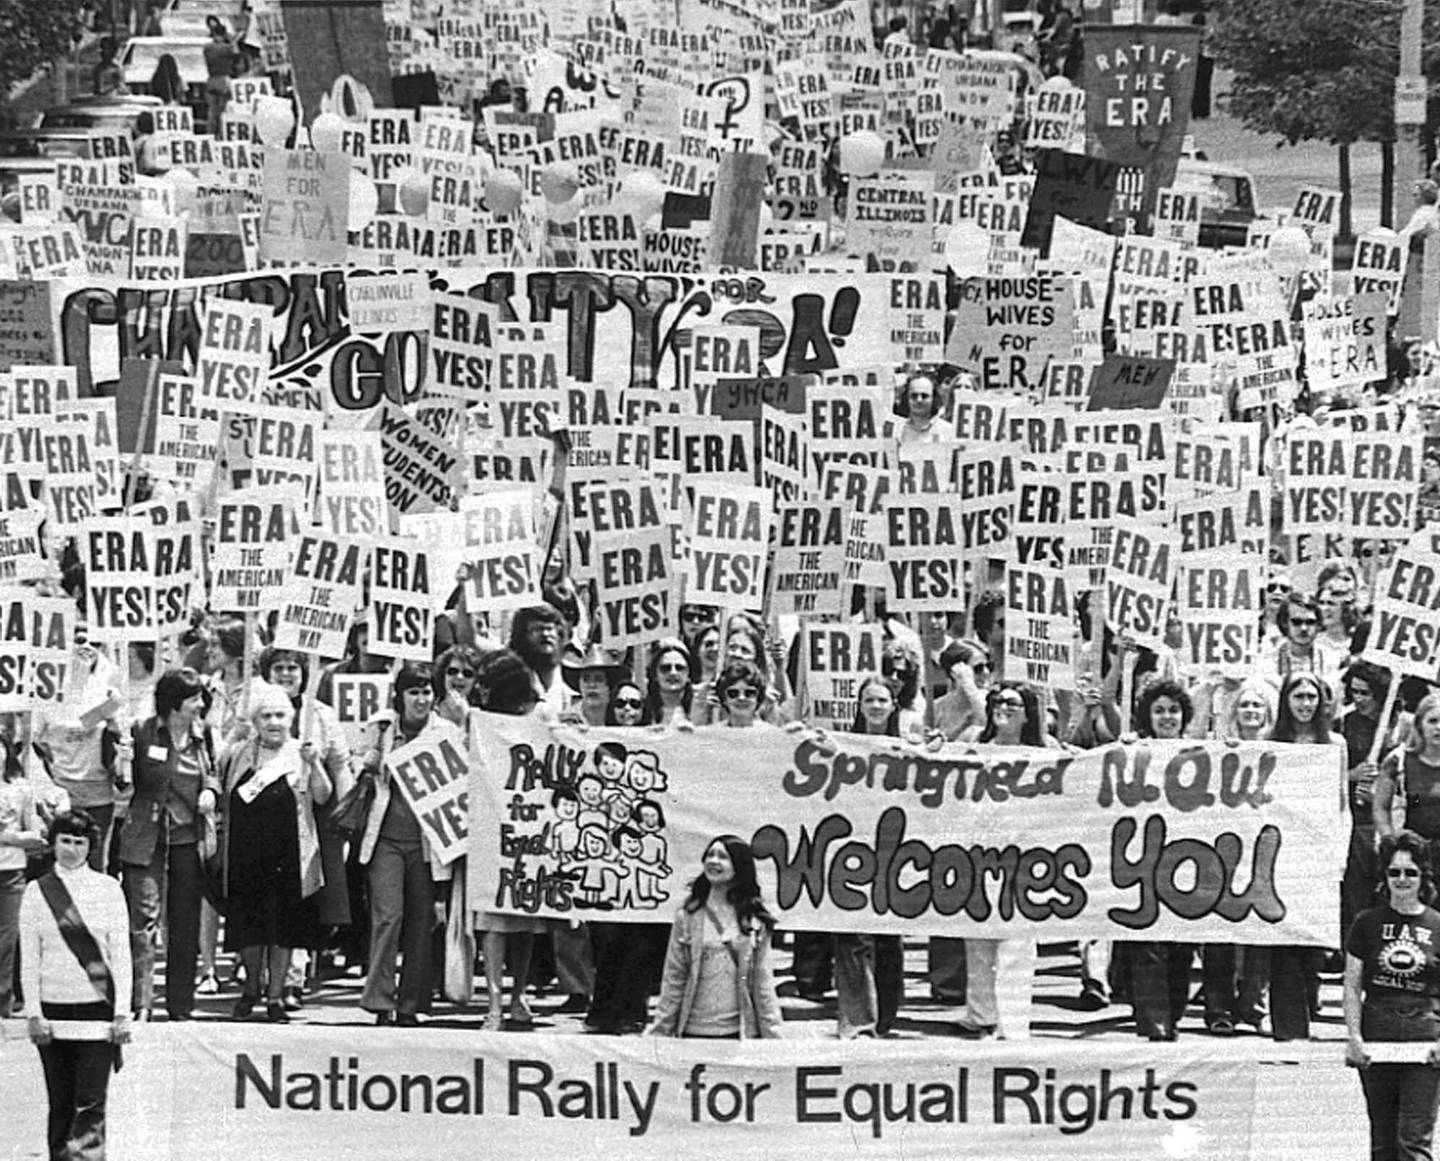 Marchers descend on the Capitol in Springfield, Illinois, to demonstrate for the passage of the Equal Rights Amendment, May 16, 1976. AP Photo